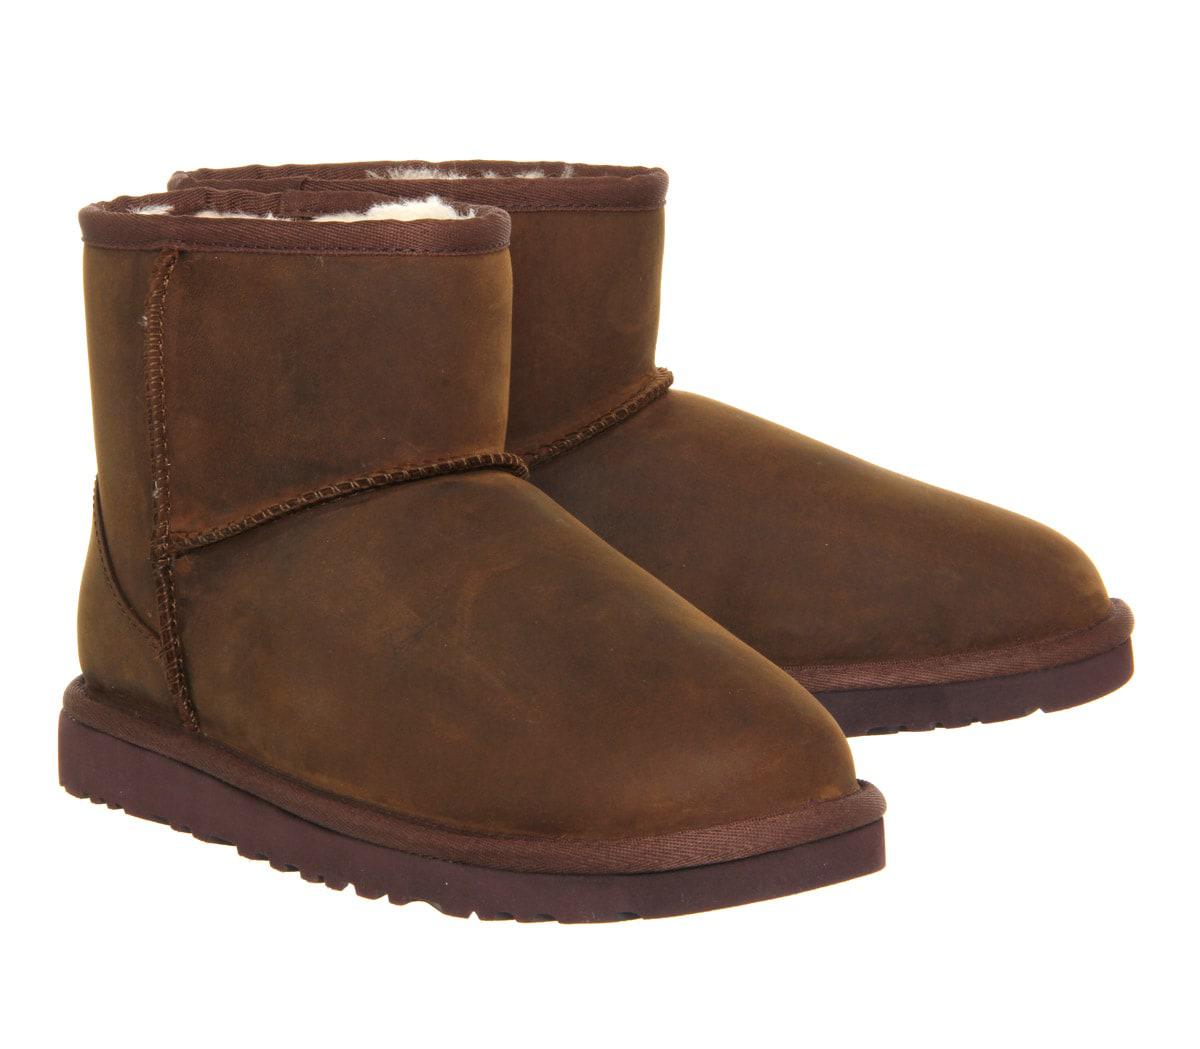 Lyst - UGG Classic Mini Boots in Brown